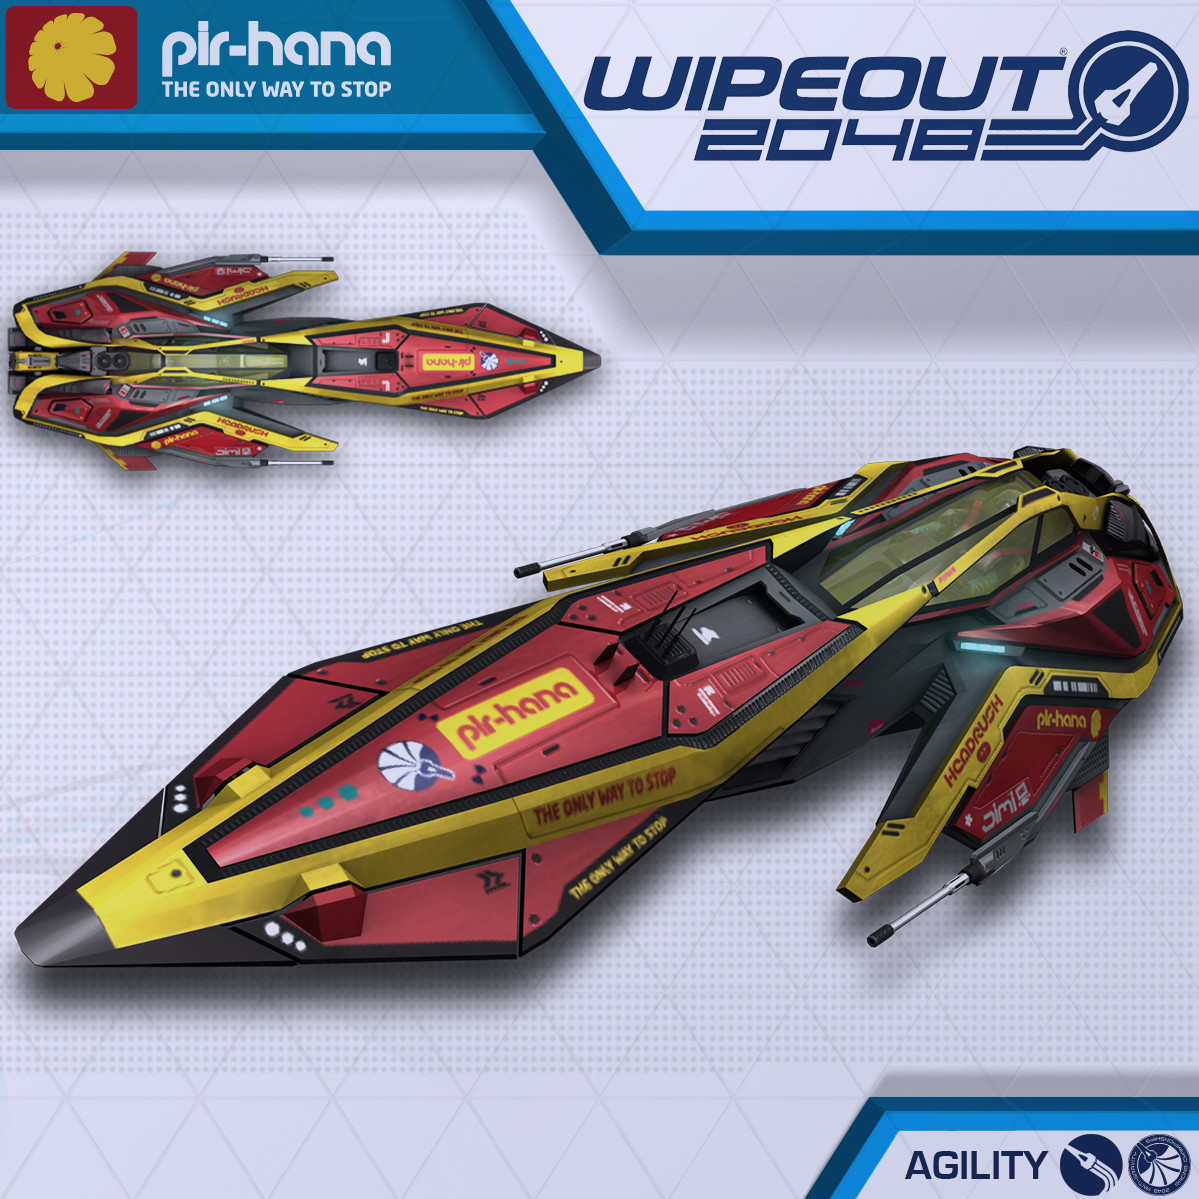 wipeout 2048 cover